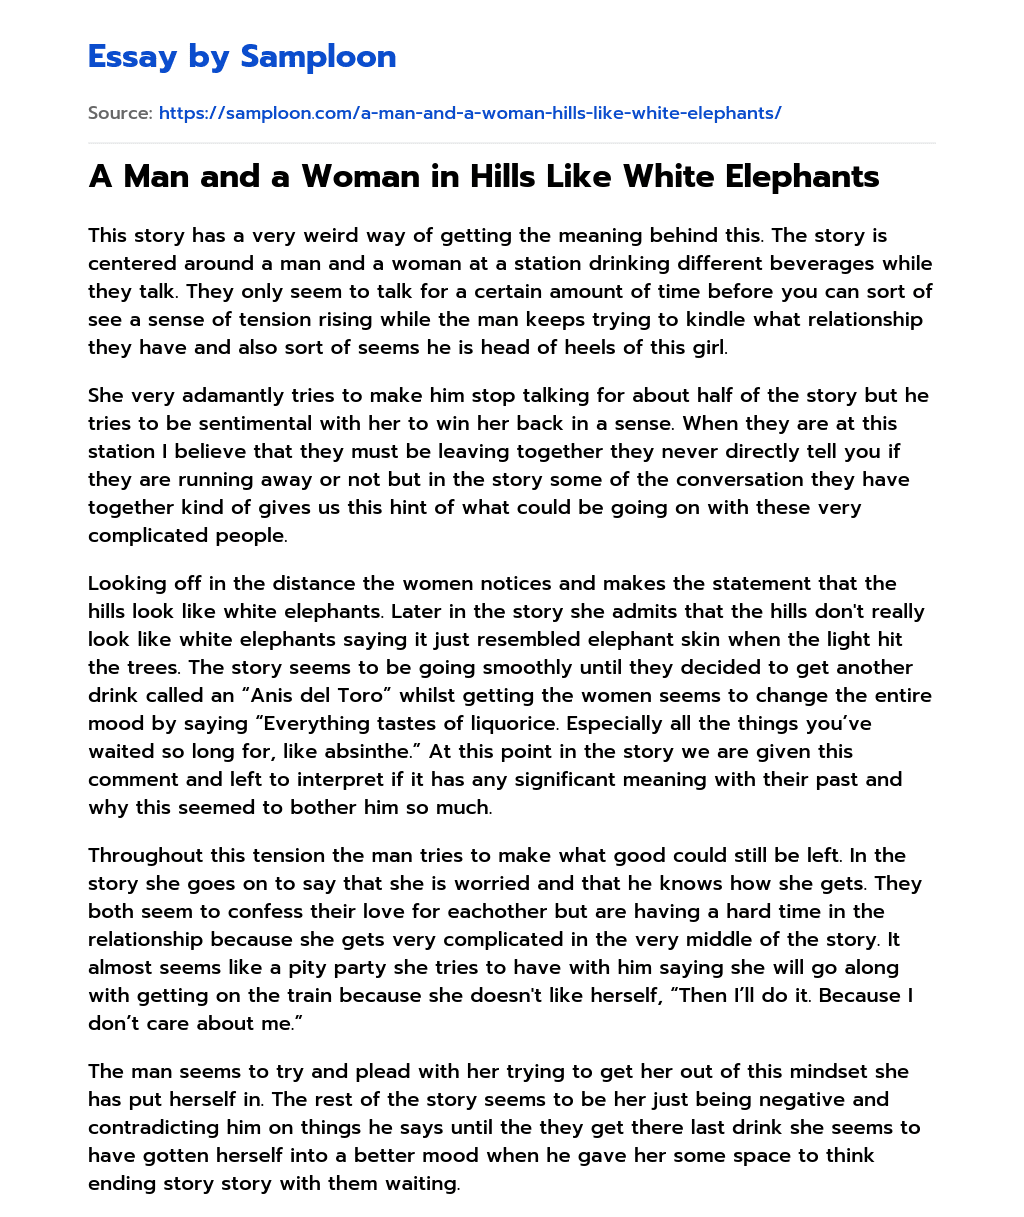 A Man and a Woman in Hills Like White Elephants essay